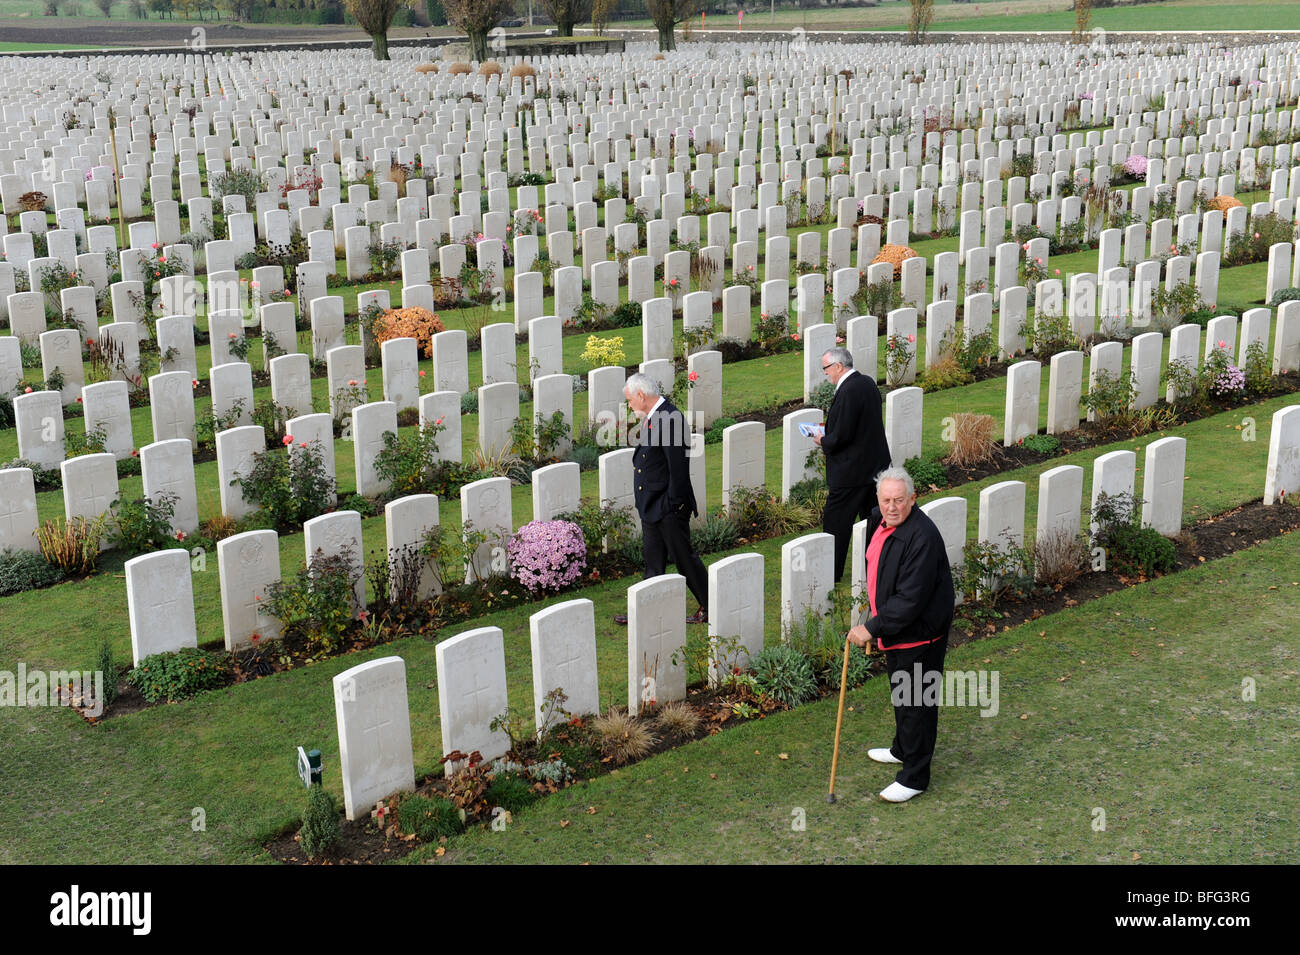 Visitors looking at the Graves of First World War soldiers at Tyne Cot Cemetery Passchendale Ypres Belgium Stock Photo